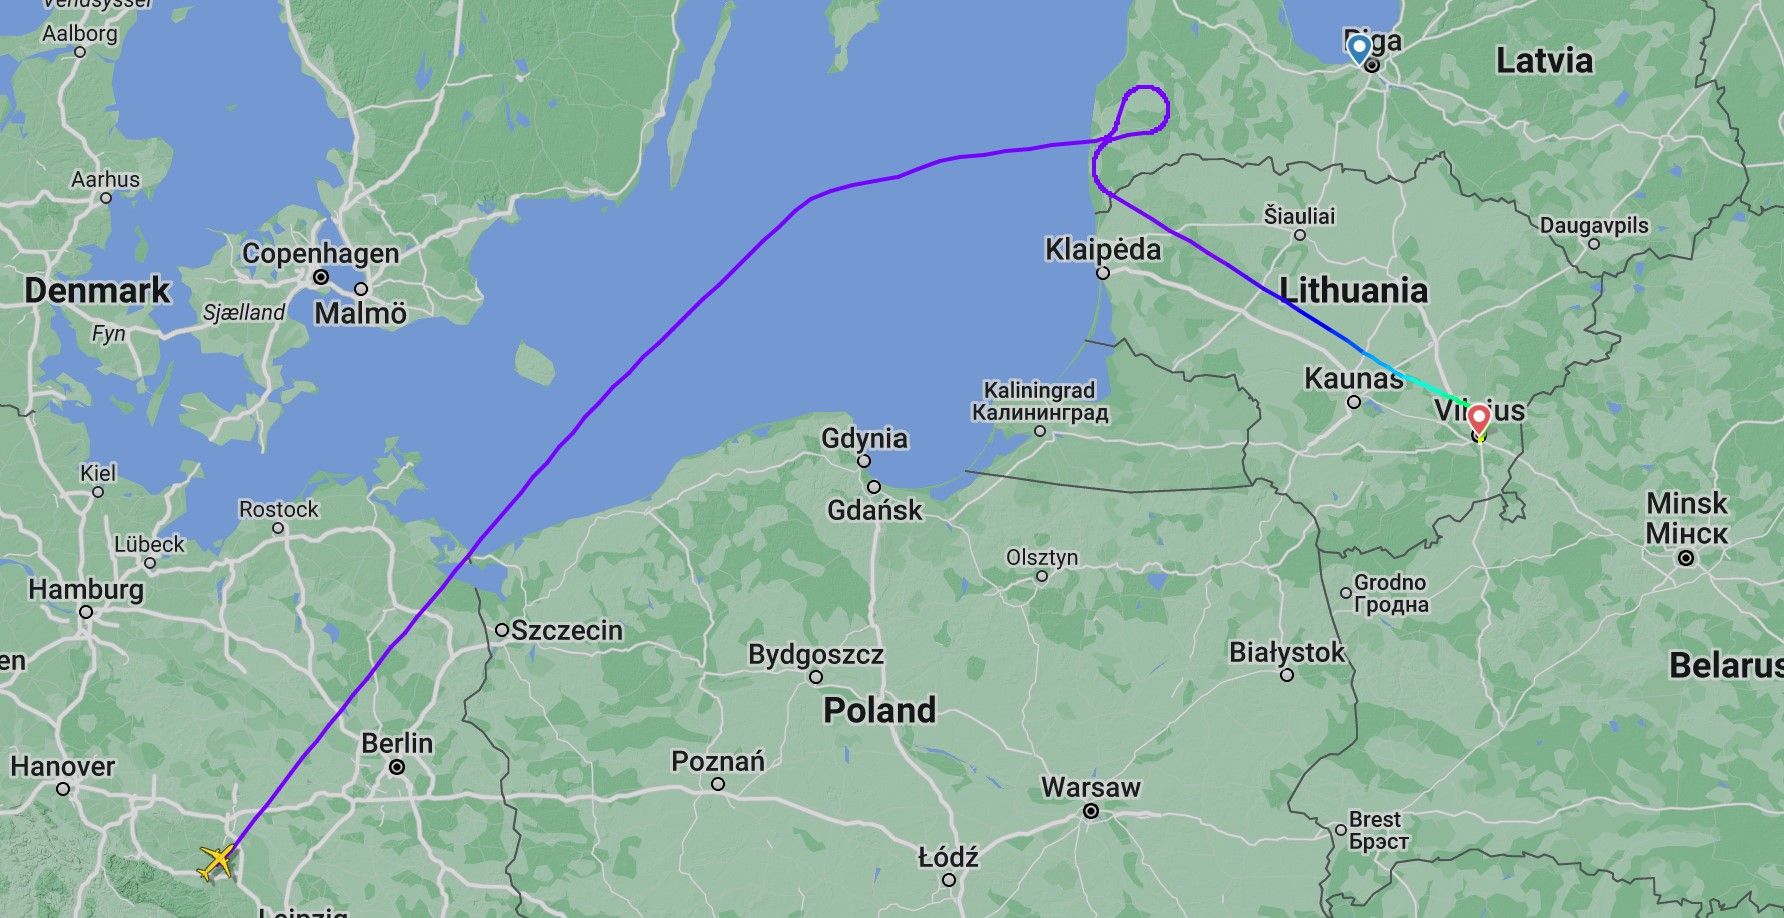 LH892 diverted to VNO